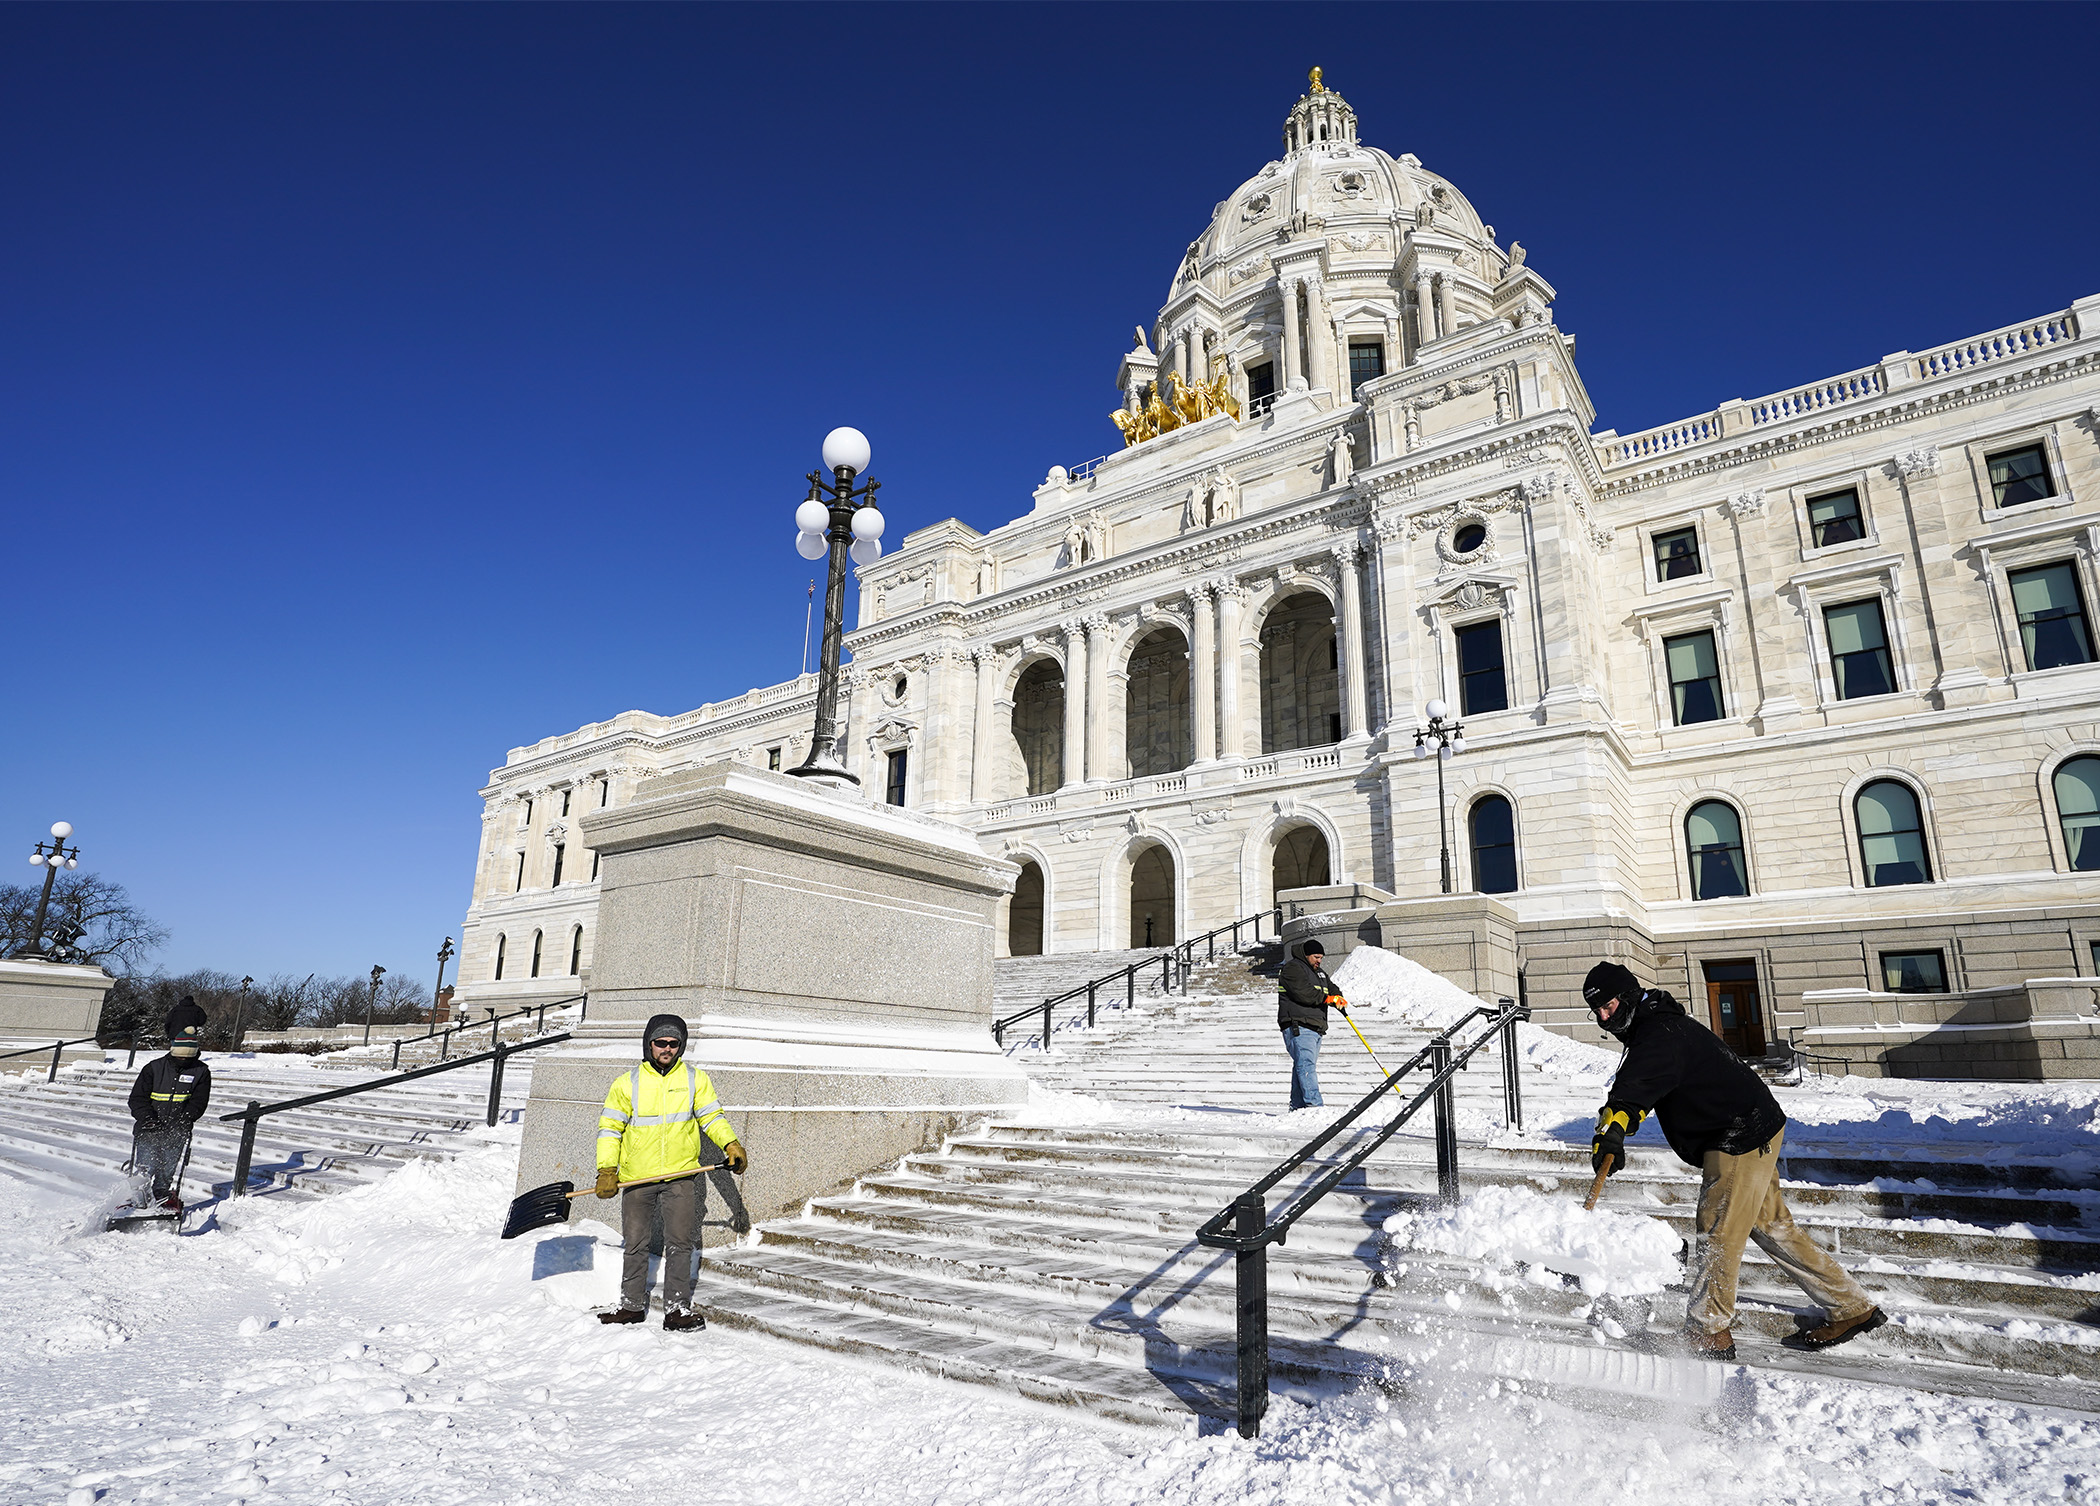 Members of the Department of Administration’s Plant Management grounds crew work to clear snow from the State Capitol steps on a frigid morning Feb. 23. Photo by Paul Battaglia